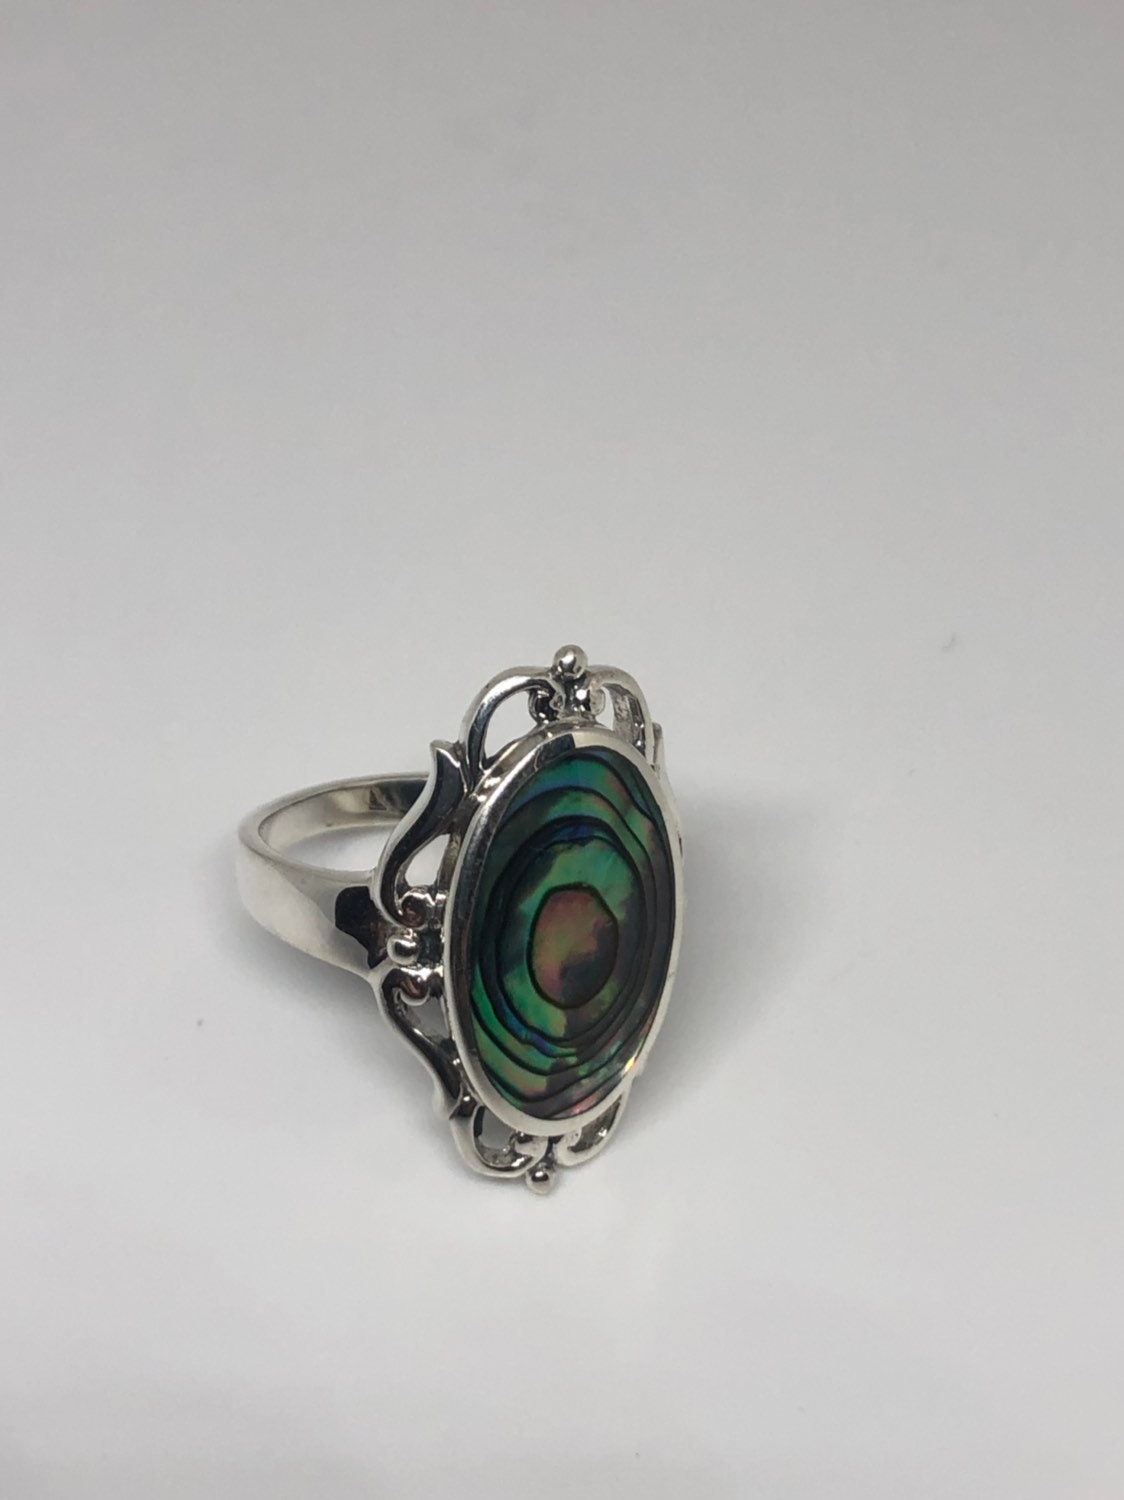 Antique Abalone Filigree Sterling Silver Ring